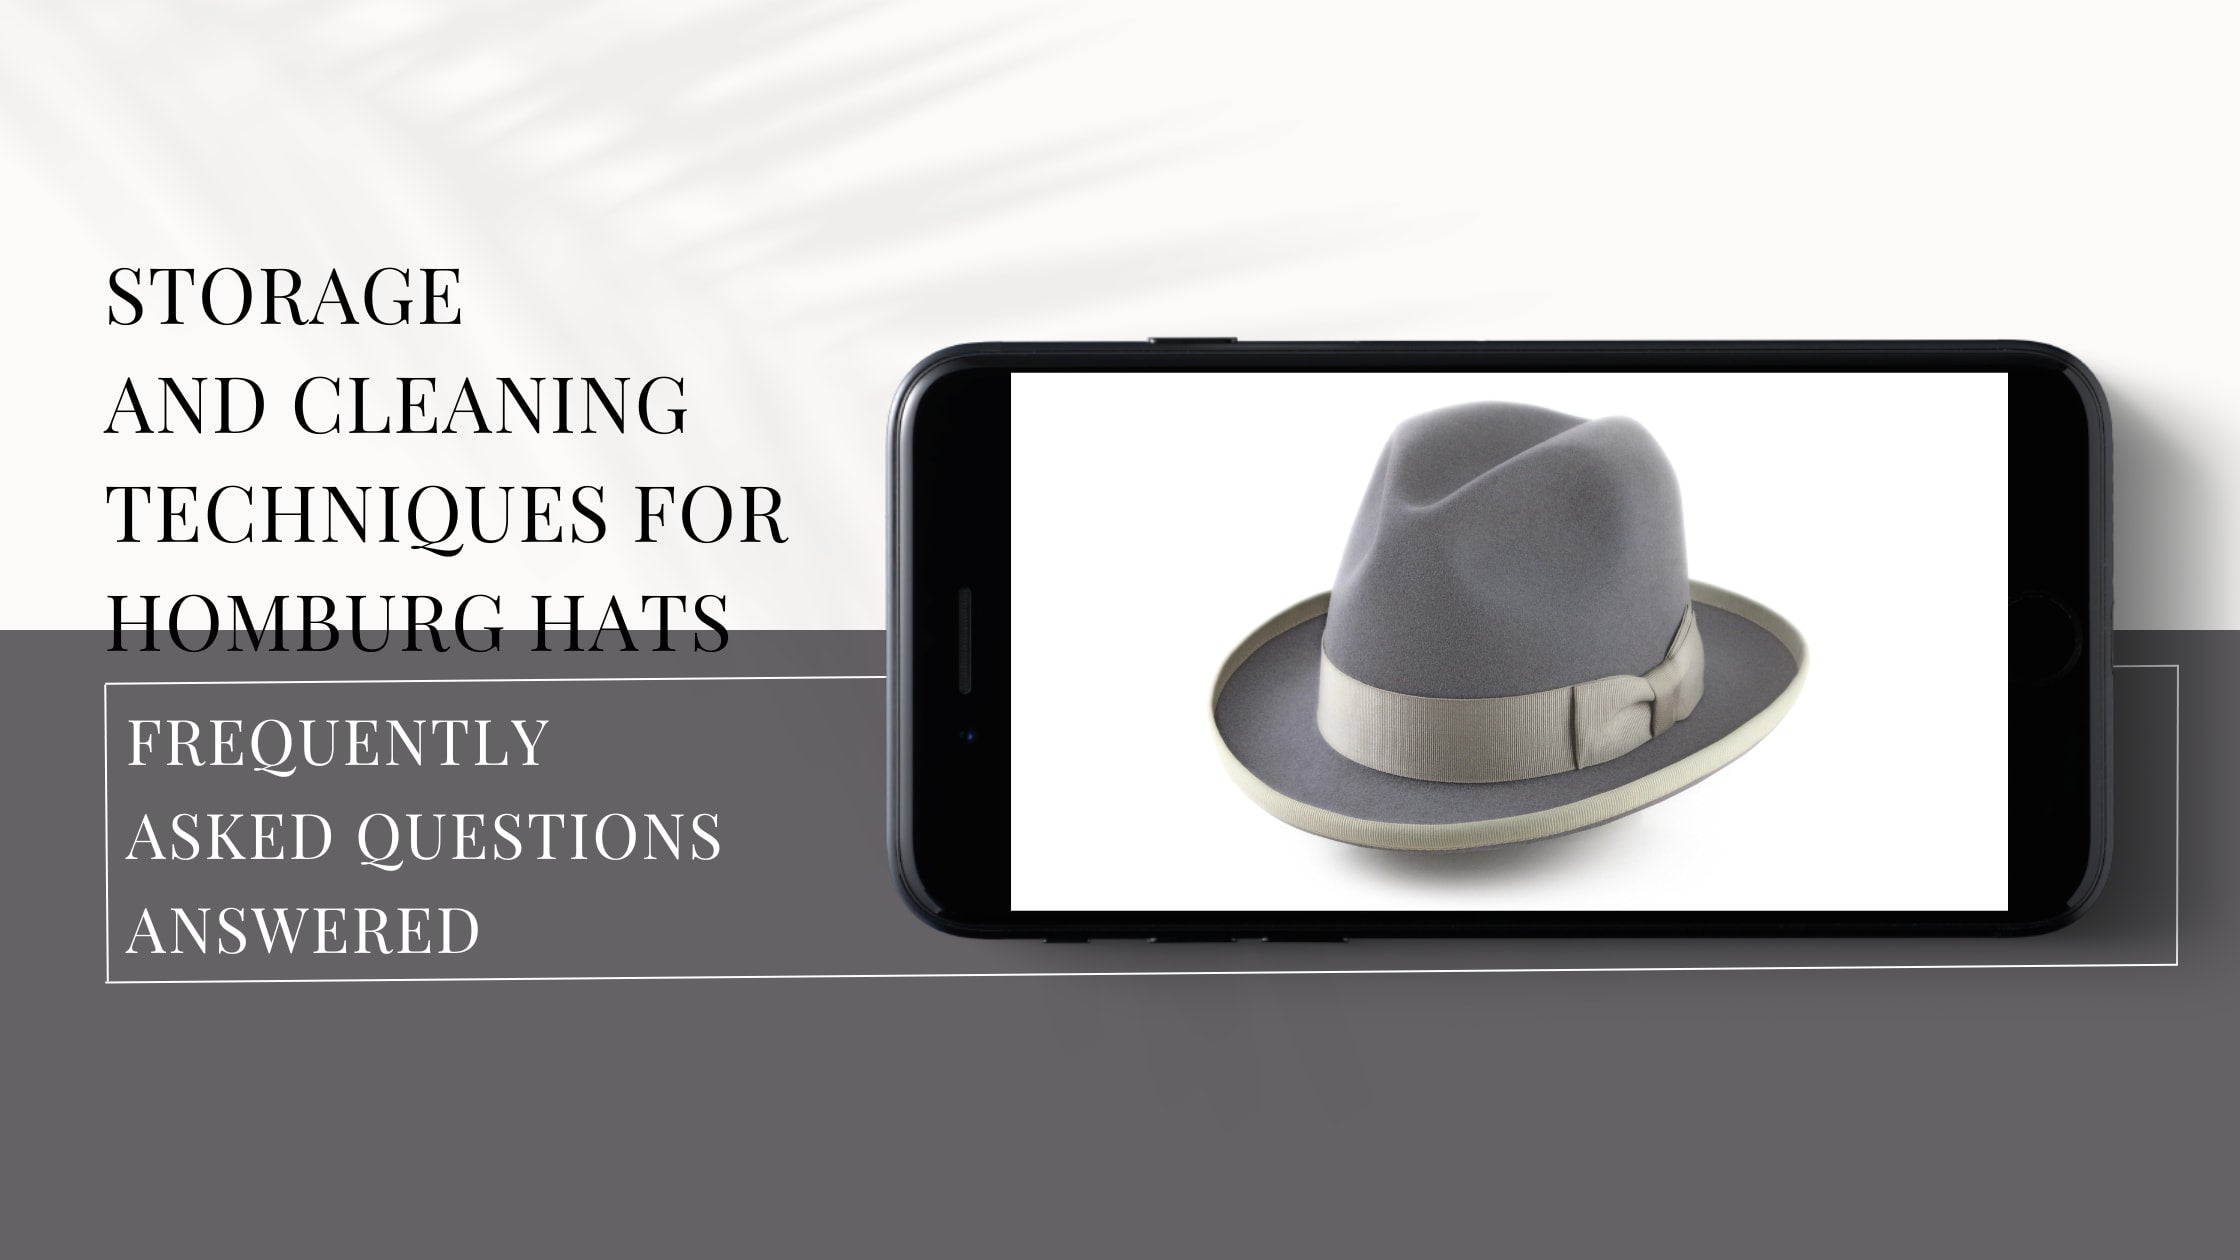 A photo of a Homburg hat displayed on a phone screen. The image represents the blog post topic on storage and cleaning techniques for Homburg hats.